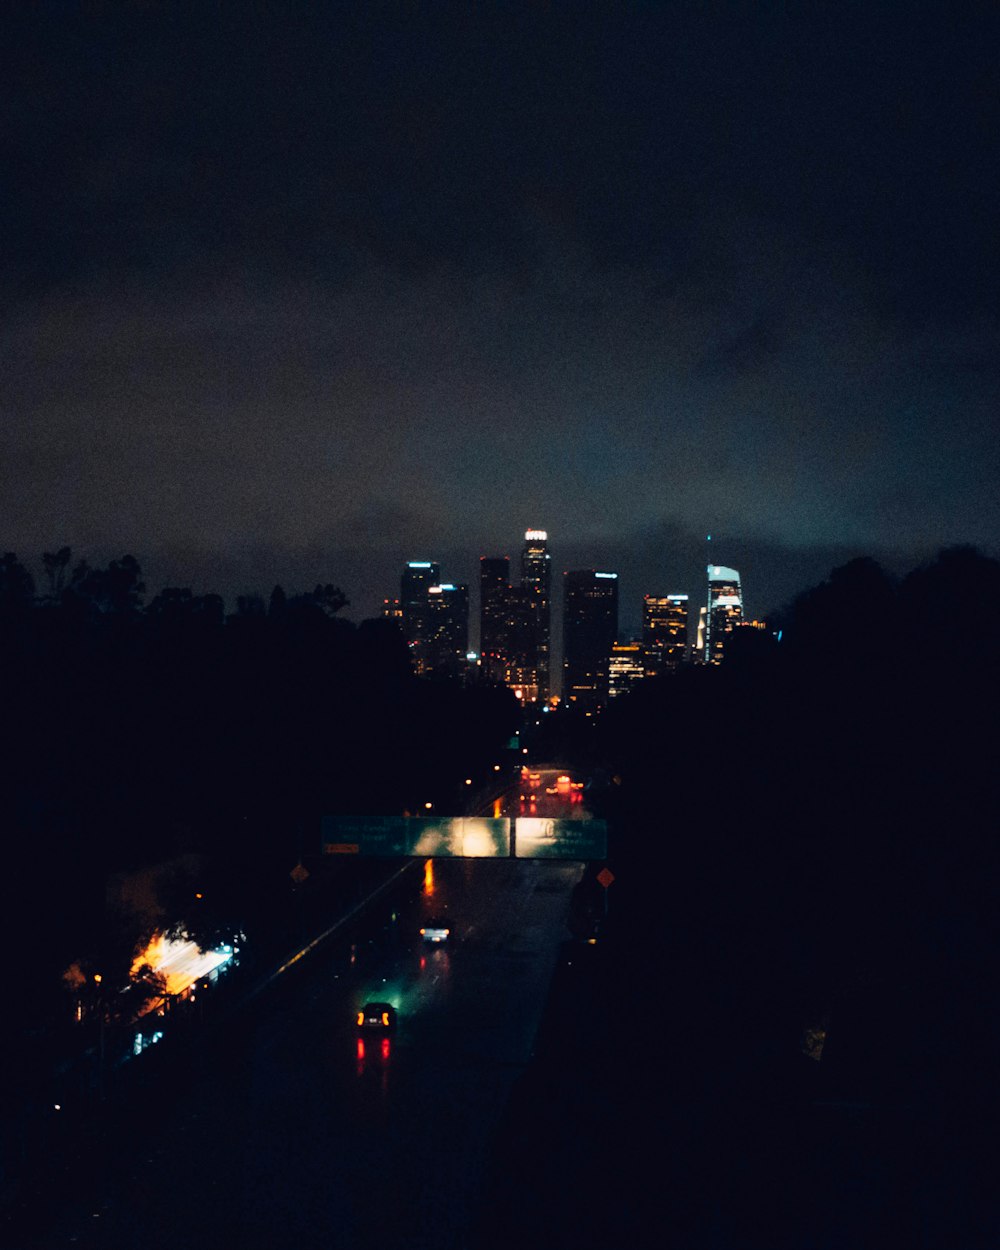 a night time view of a city skyline